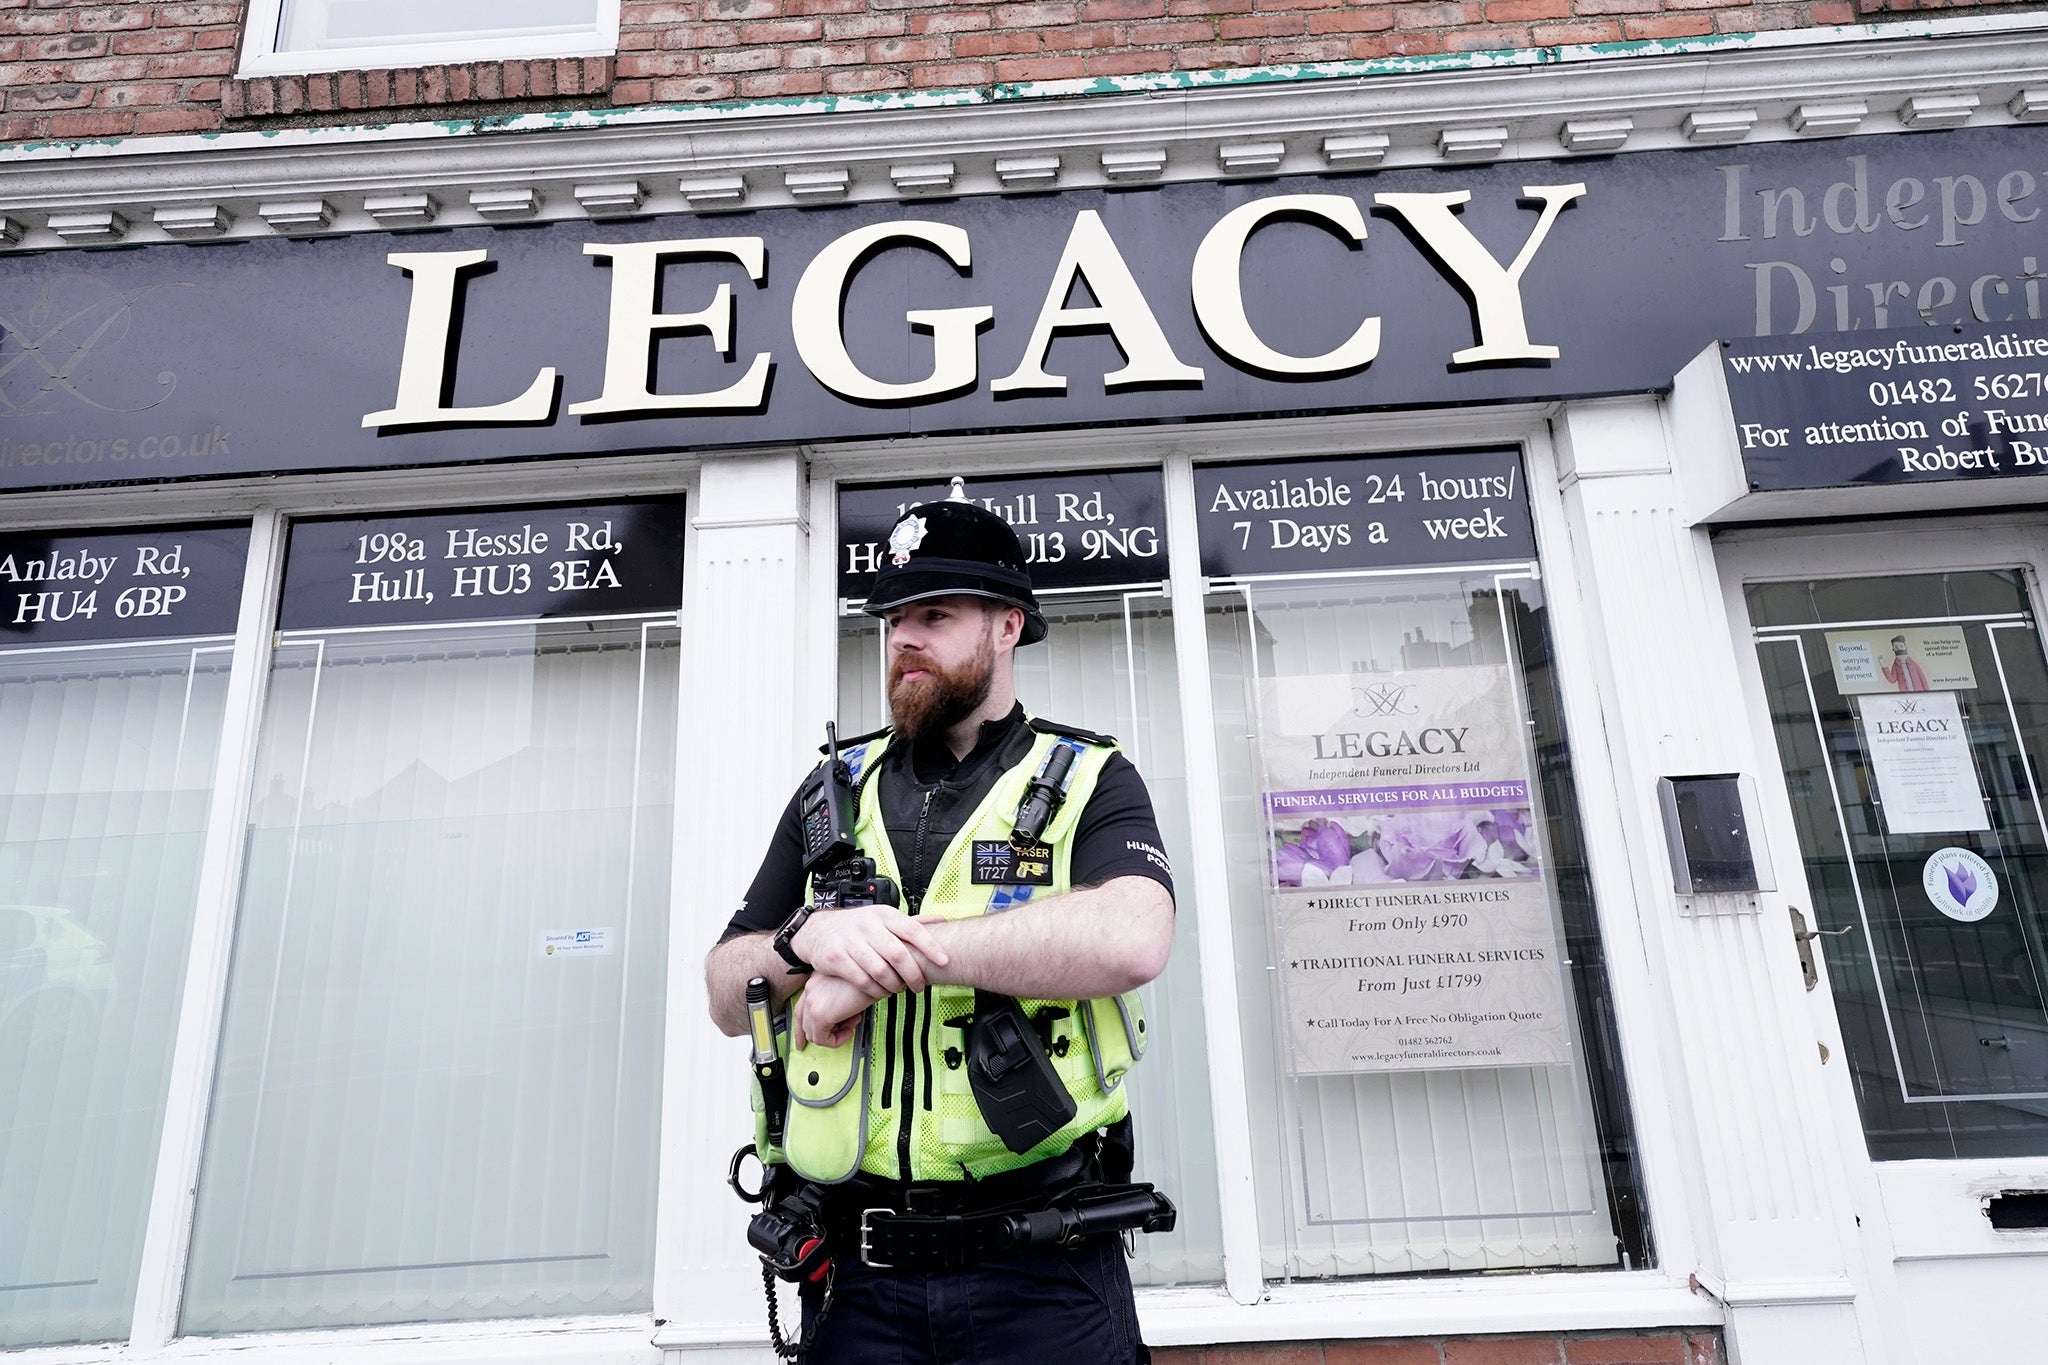 Legacy Independent Funeral Directors was raided over concerns for care of the deceased